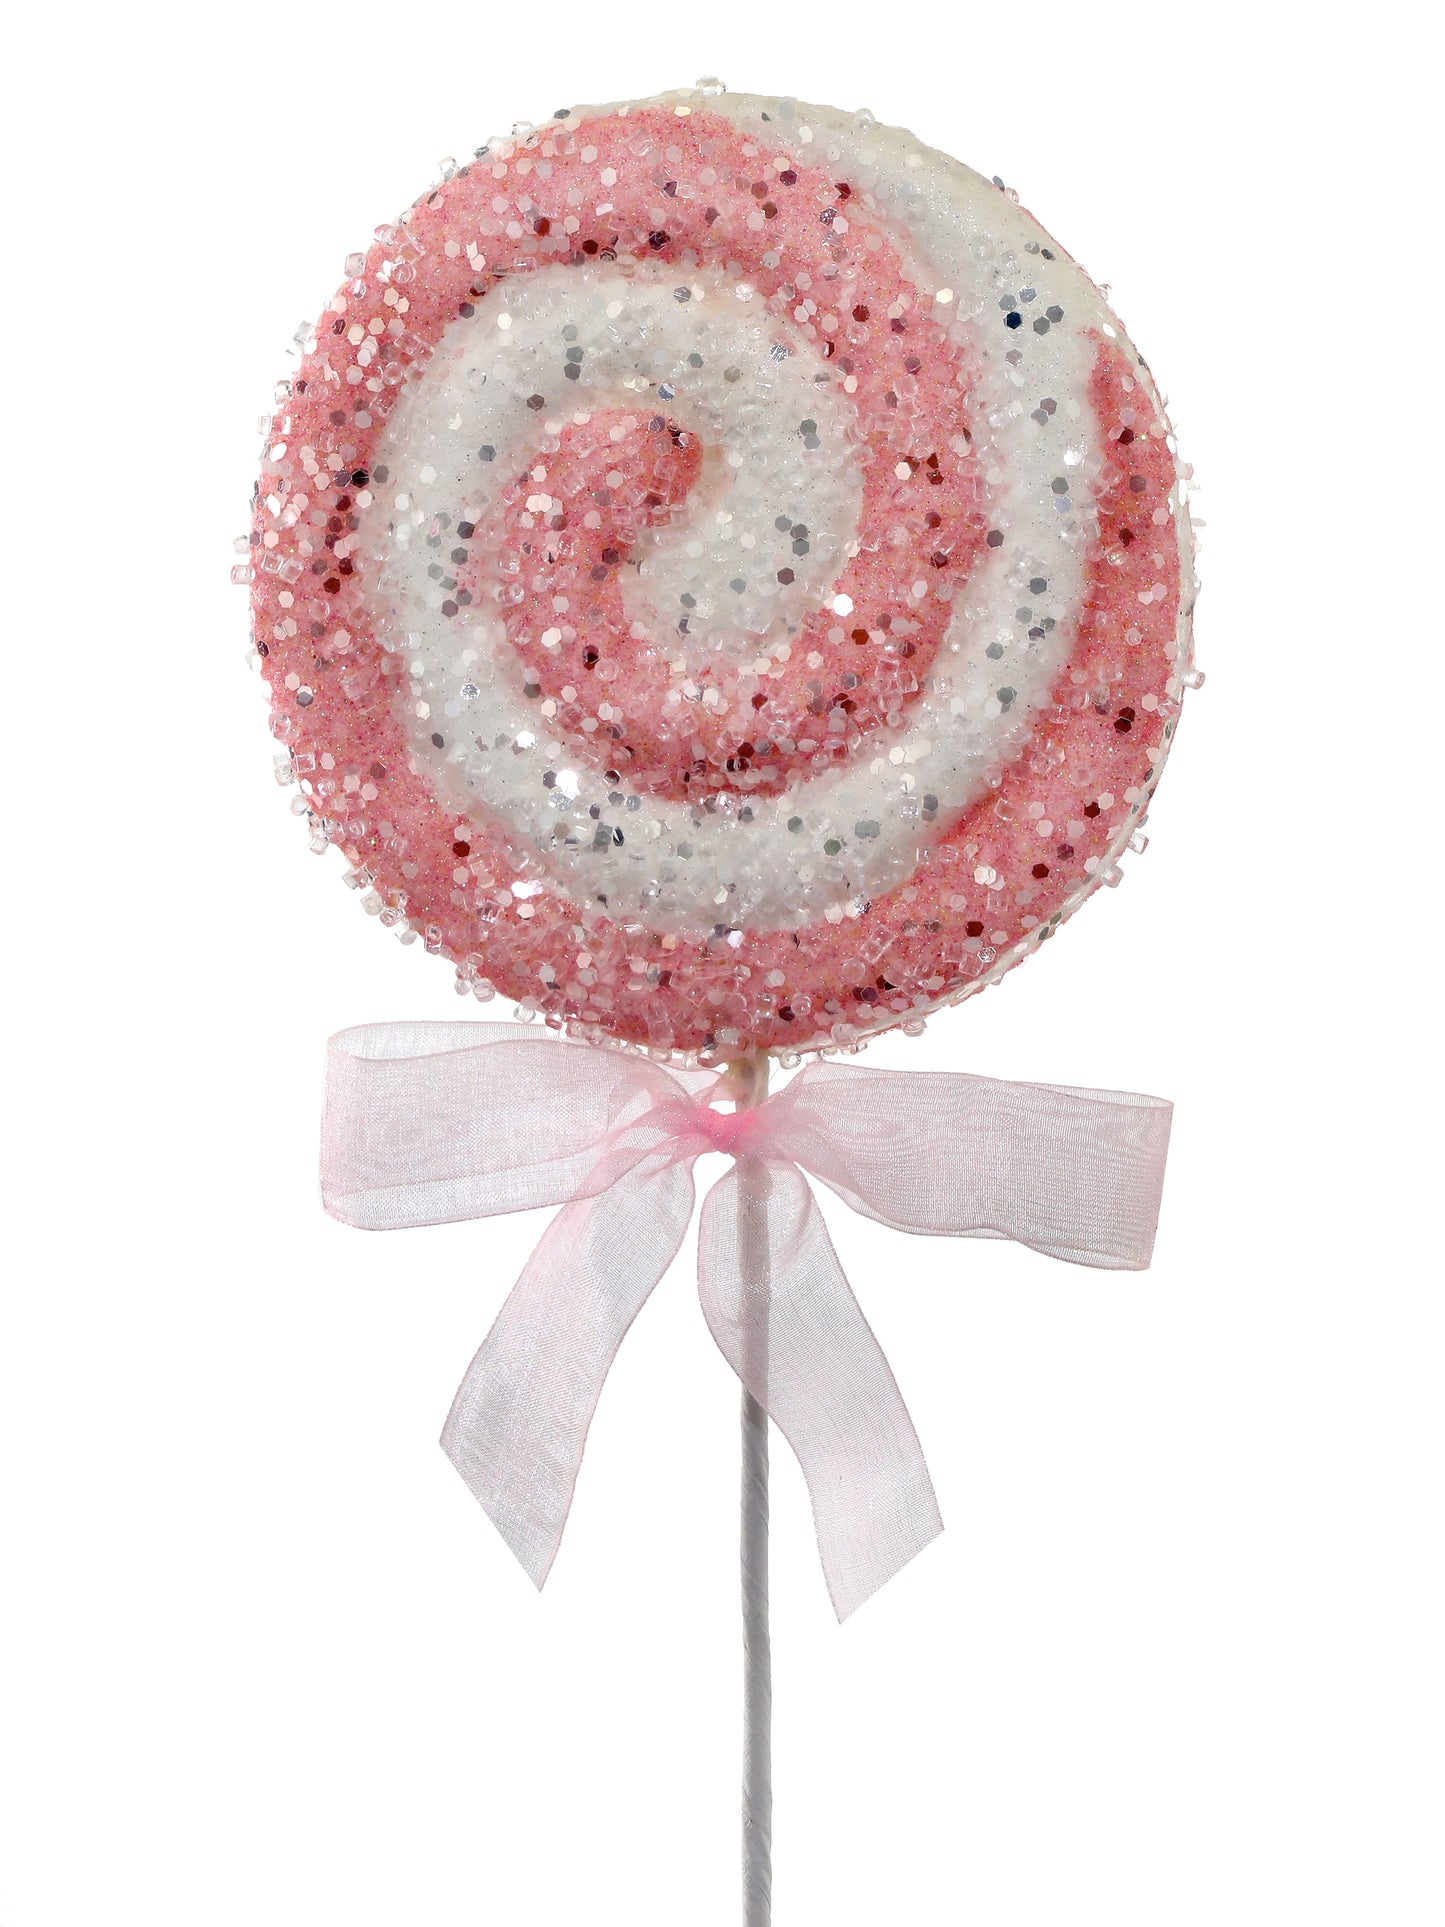 Iced Candy Lollipop Ornament